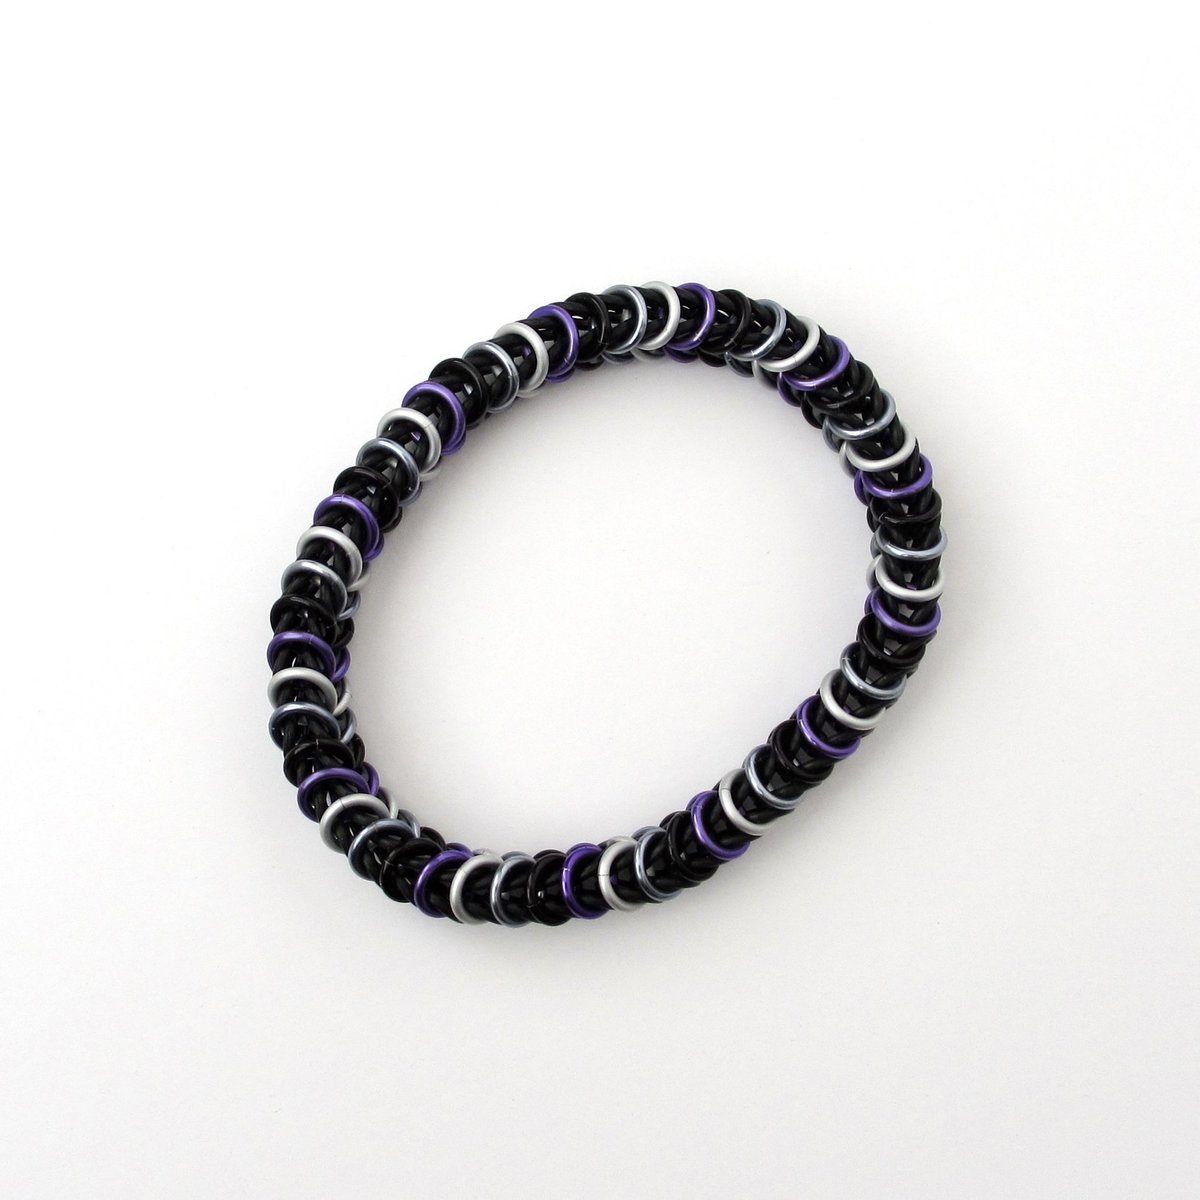 Asexual pride bracelet, chainmail stretchy bracelet, ace pride jewelry, black gray white purple